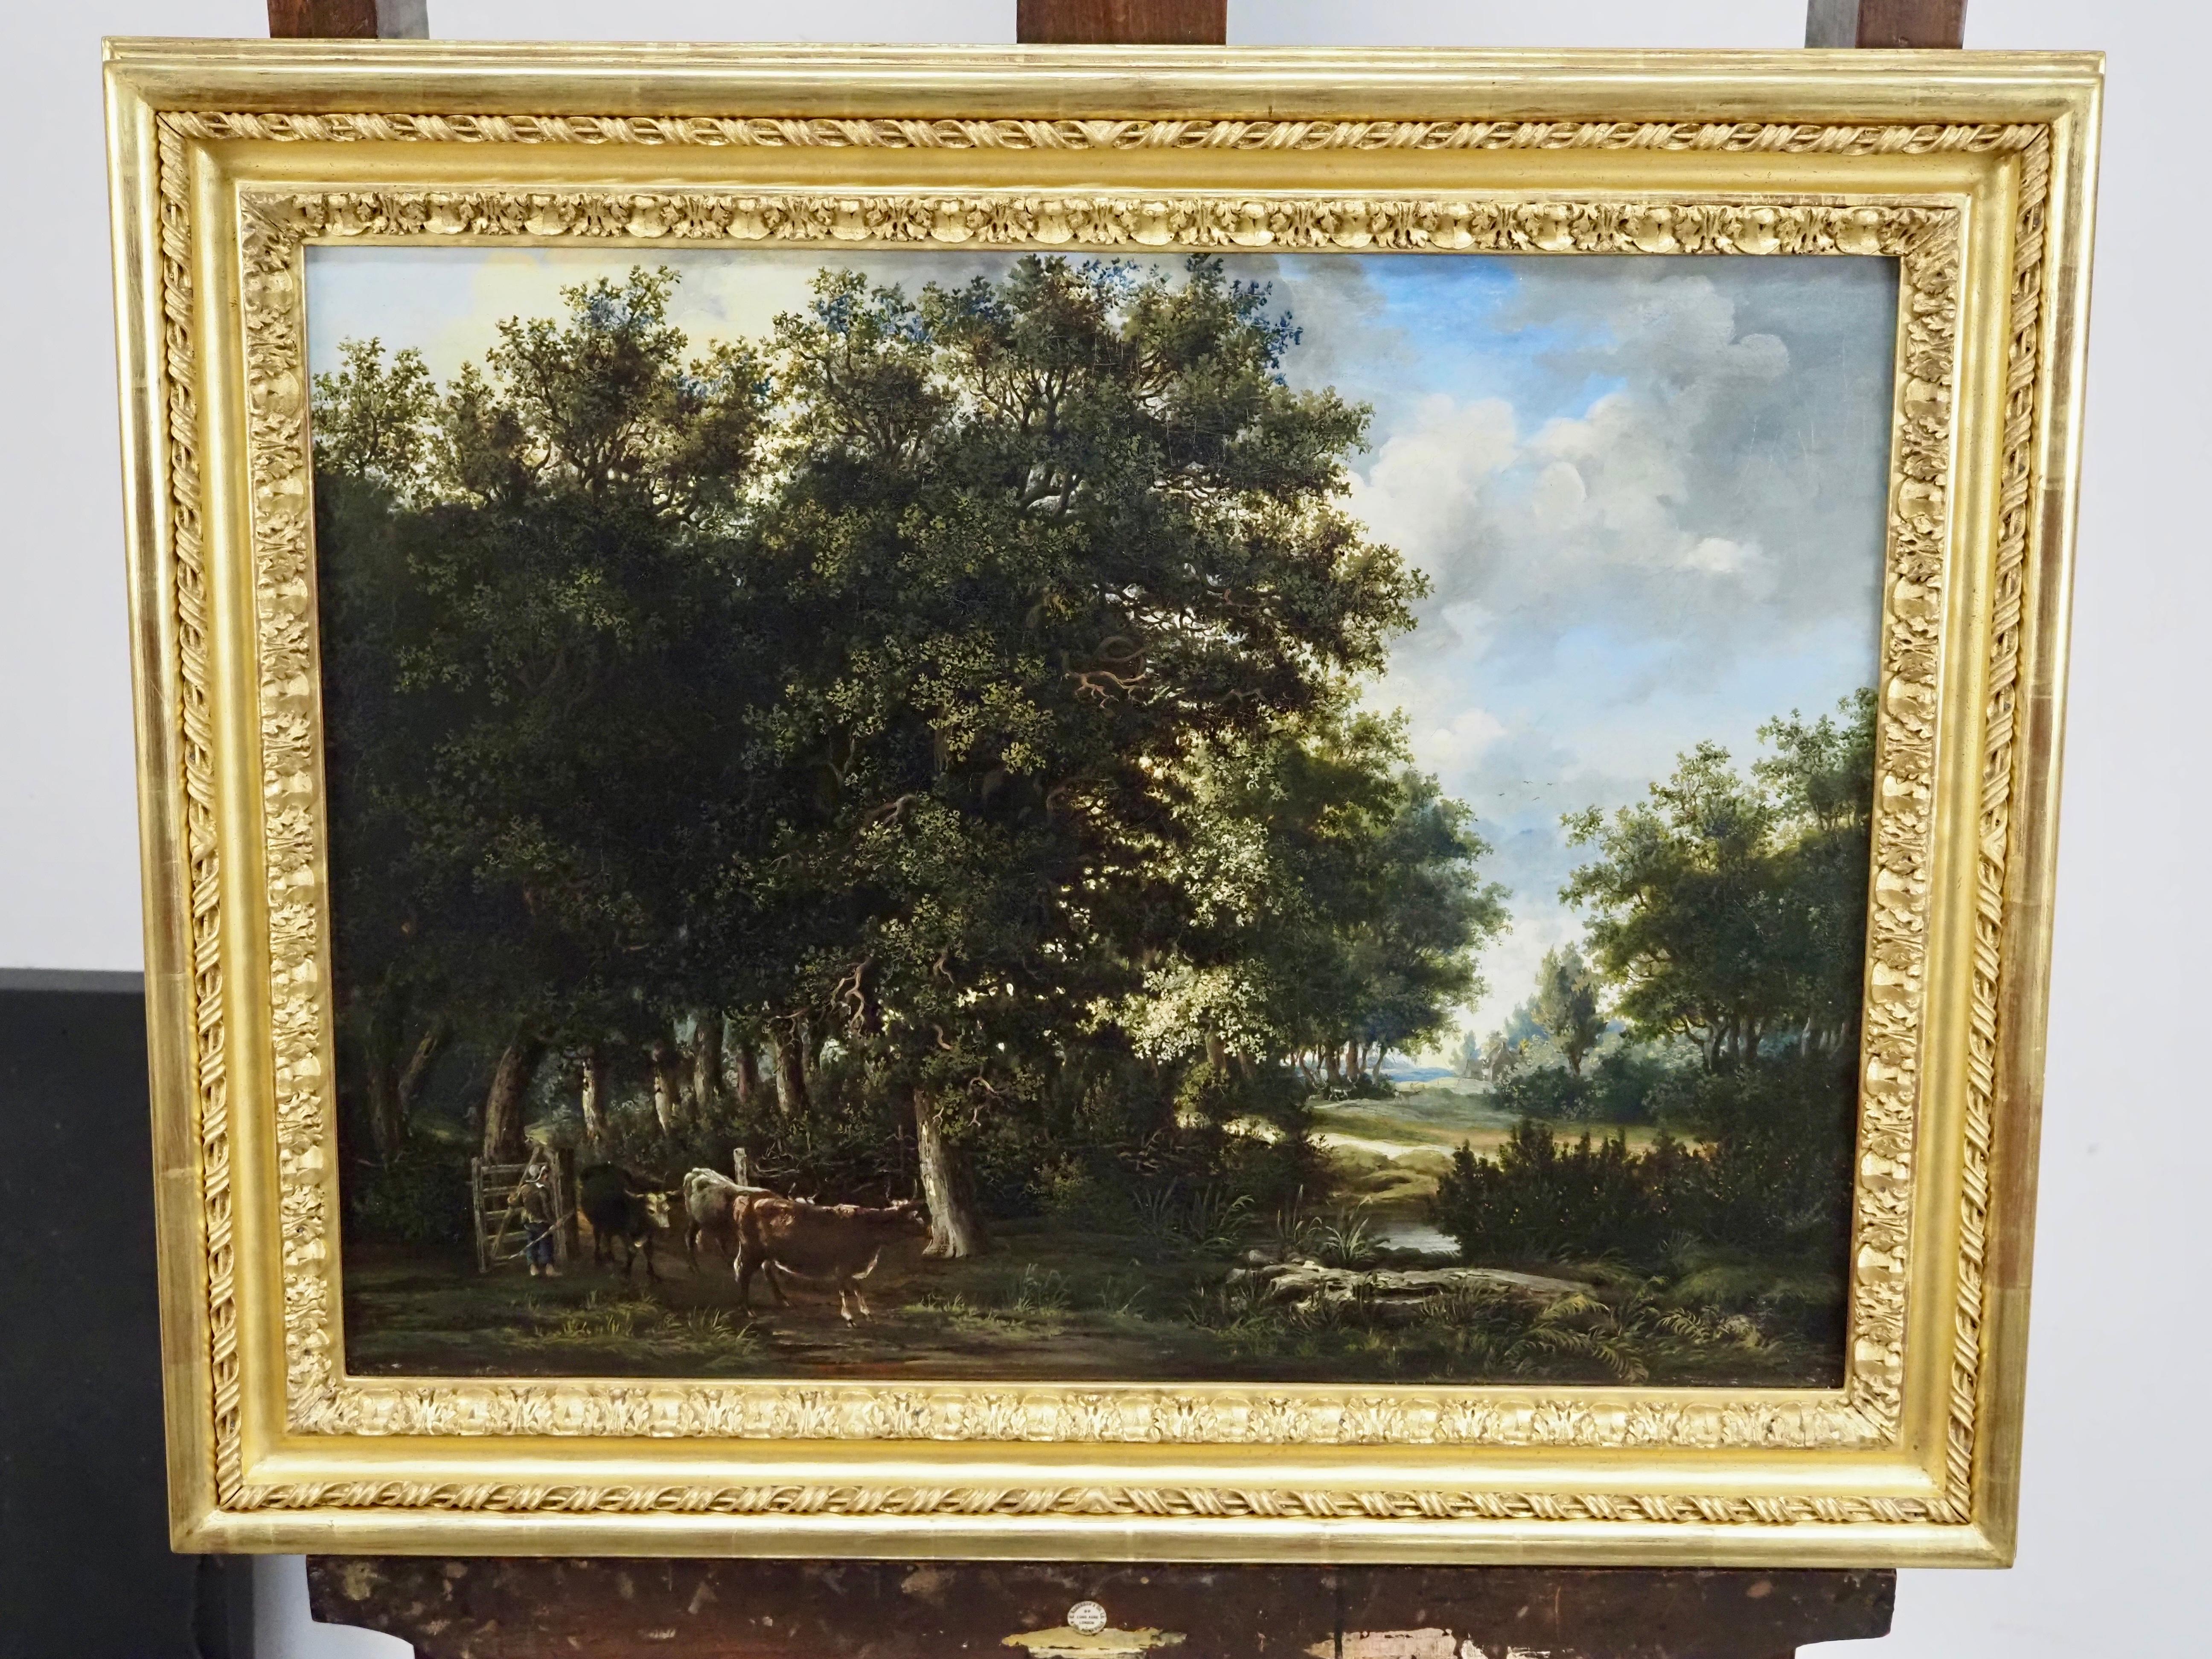 Herding cattle through a wooded river landscape - Old Masters Painting by James Stark